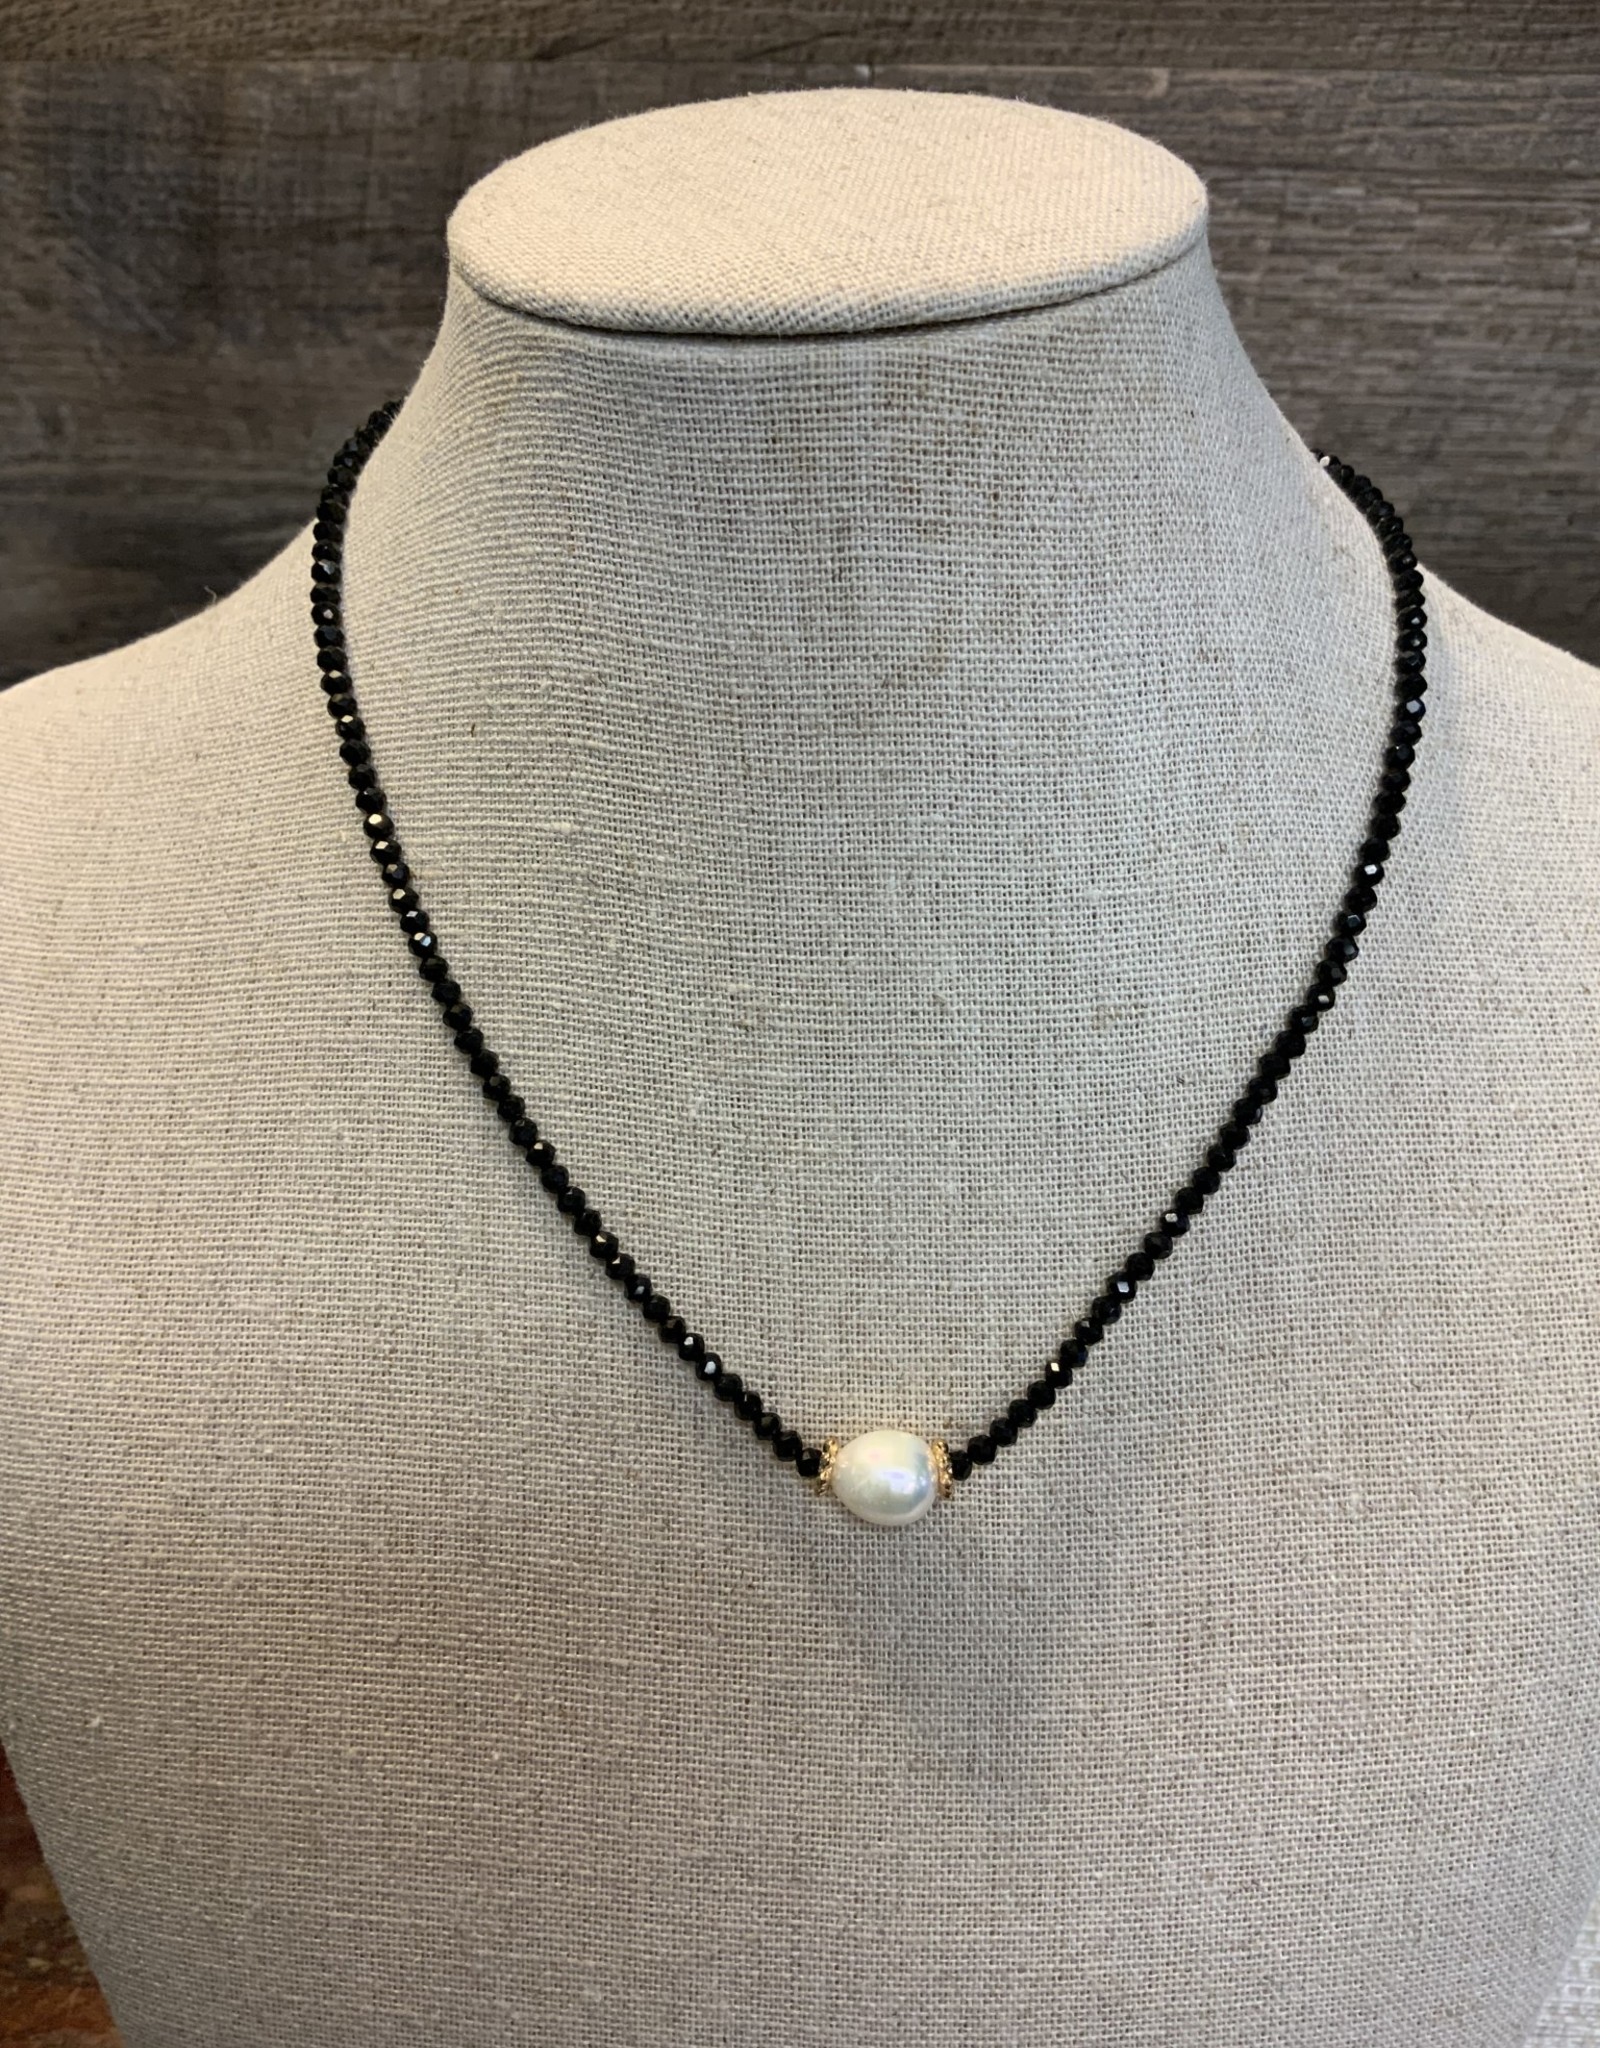 - Black Dainty Beaded Necklace With Pearl Bead